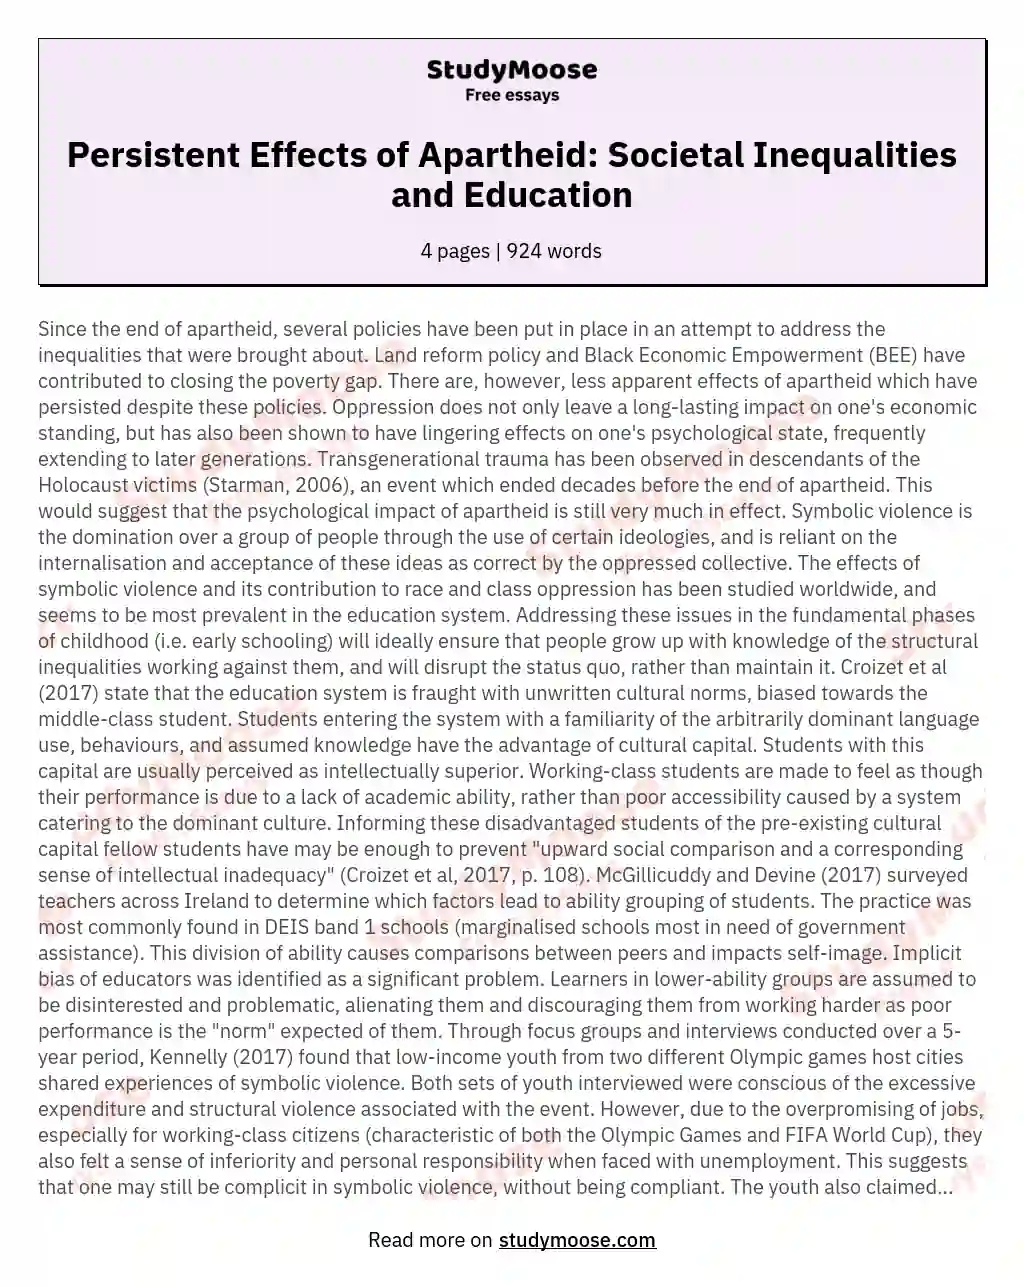 Persistent Effects of Apartheid: Societal Inequalities and Education essay